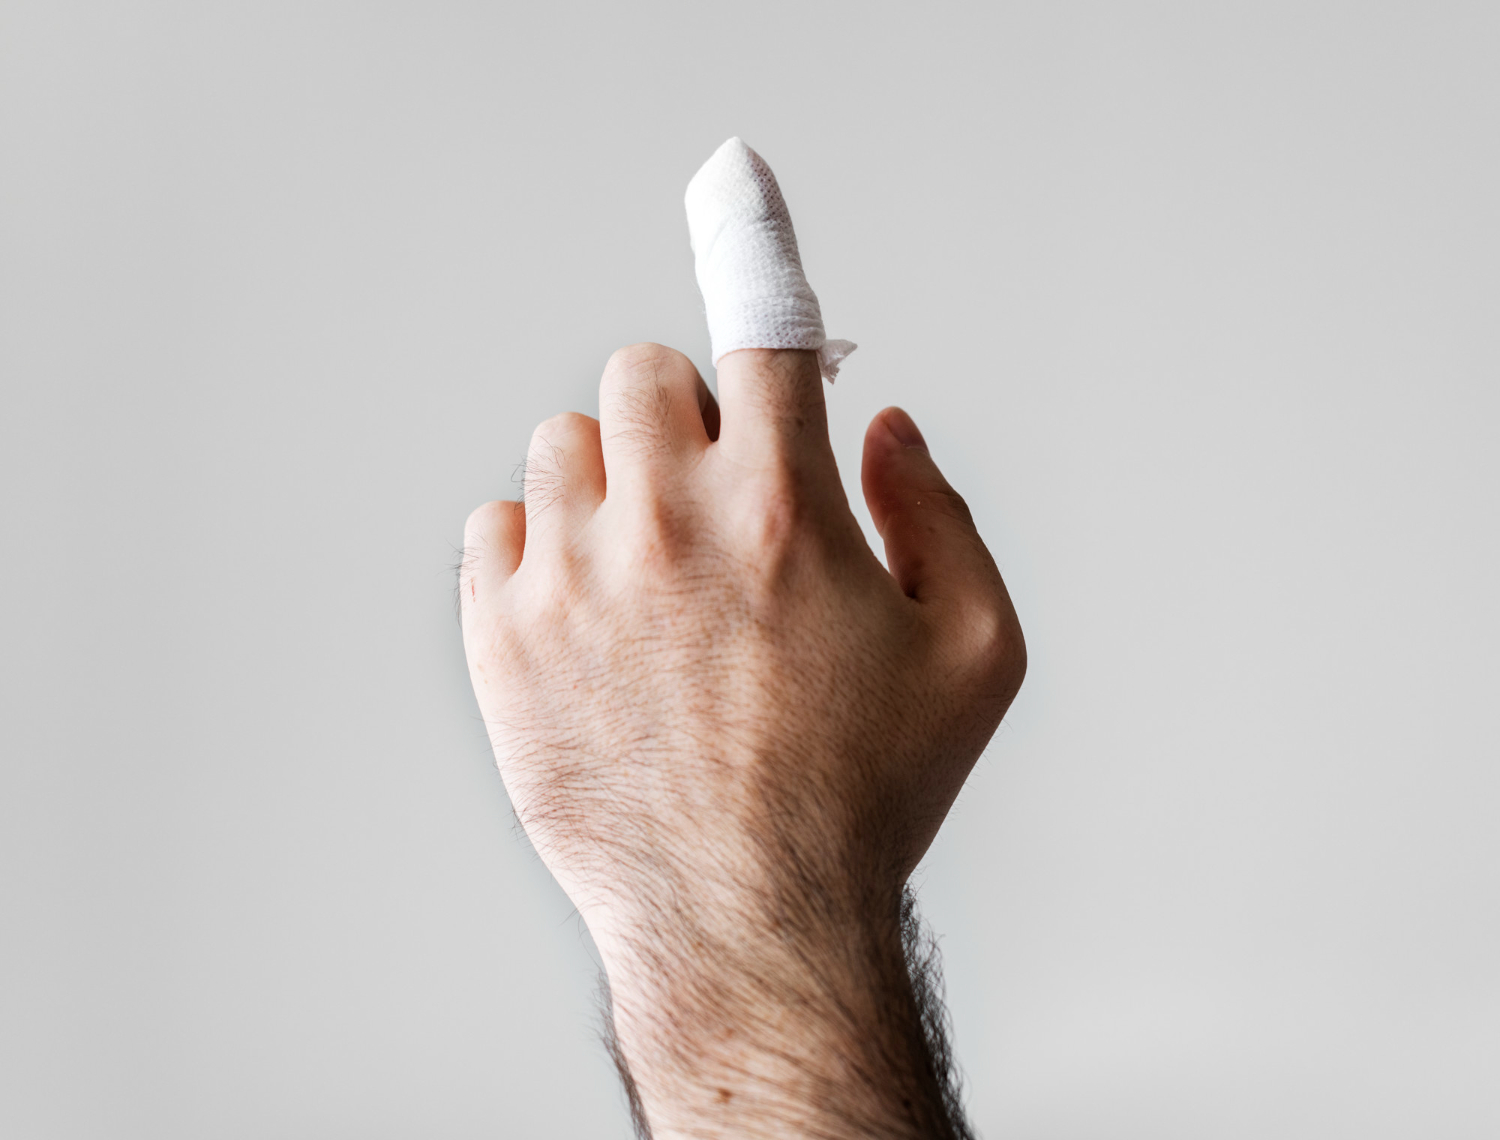 How Long Does It Take To Recover From A Finger Amputation?